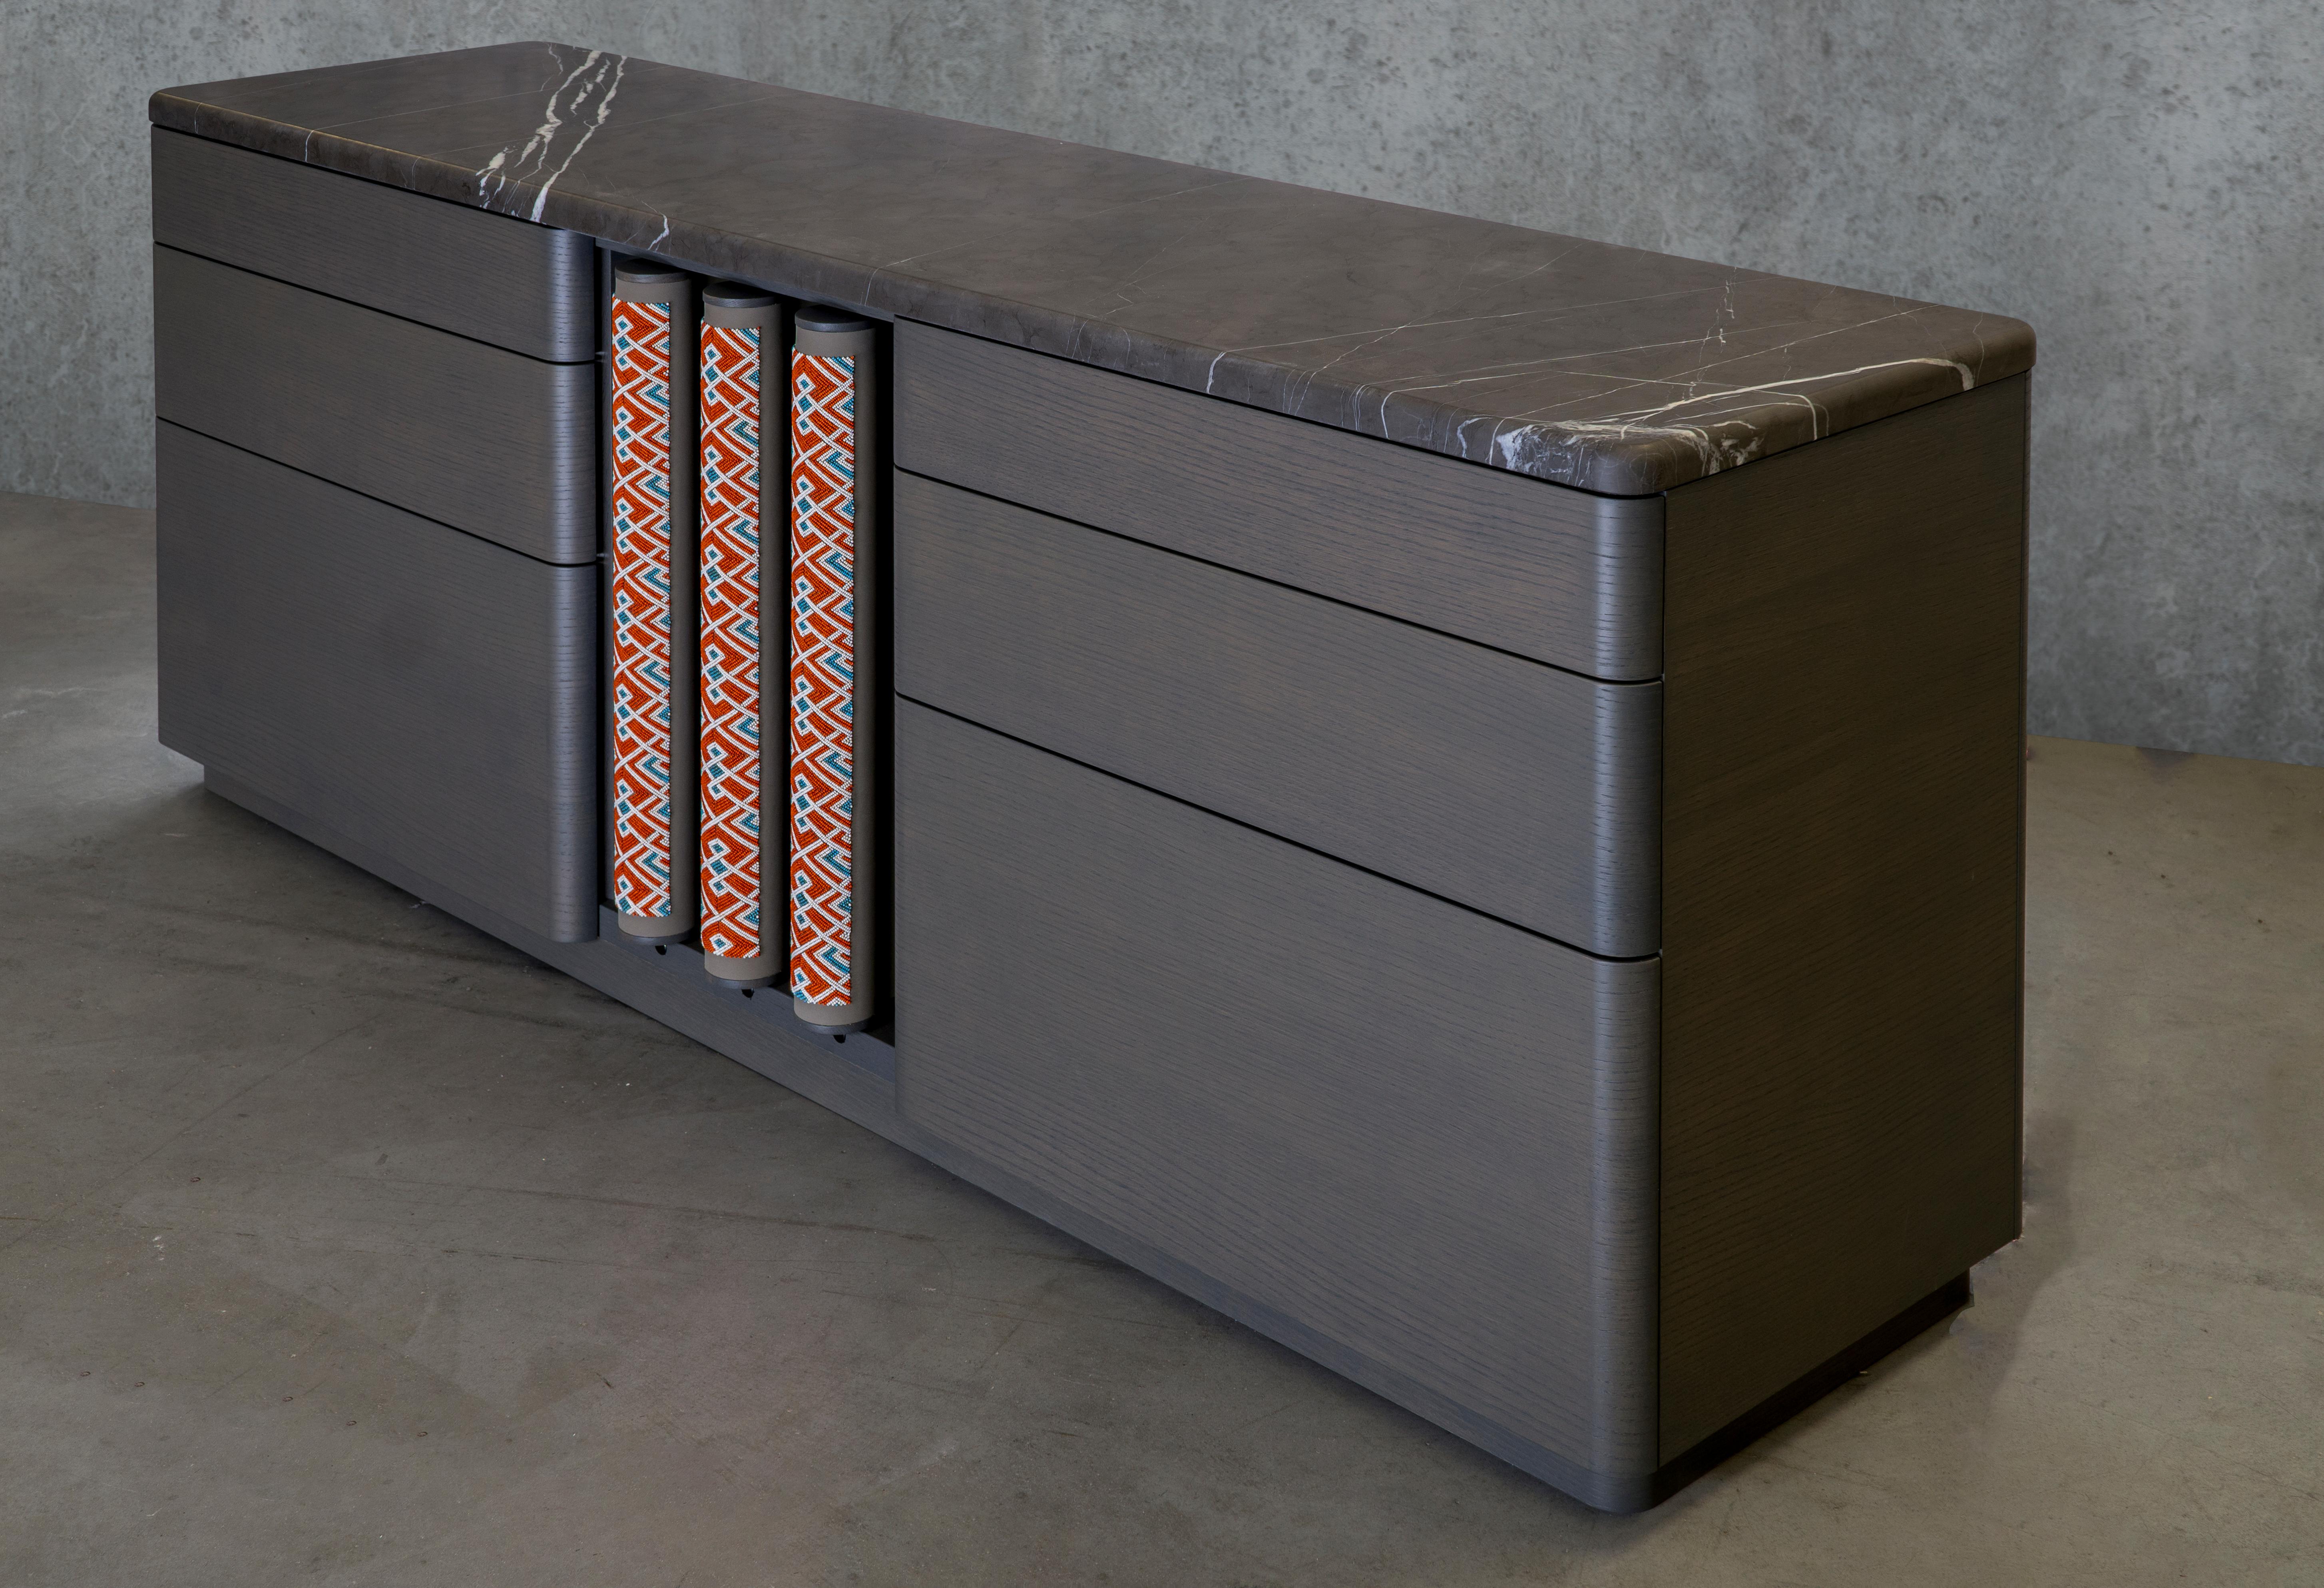 This credenza from the SoShiro Pok collection is an oak veneer storage unit embellished with intricate and complex beading artistry, leather, and marble top. The beadwork is done on fine Italian nubuck leather panels that are then upholstered onto a